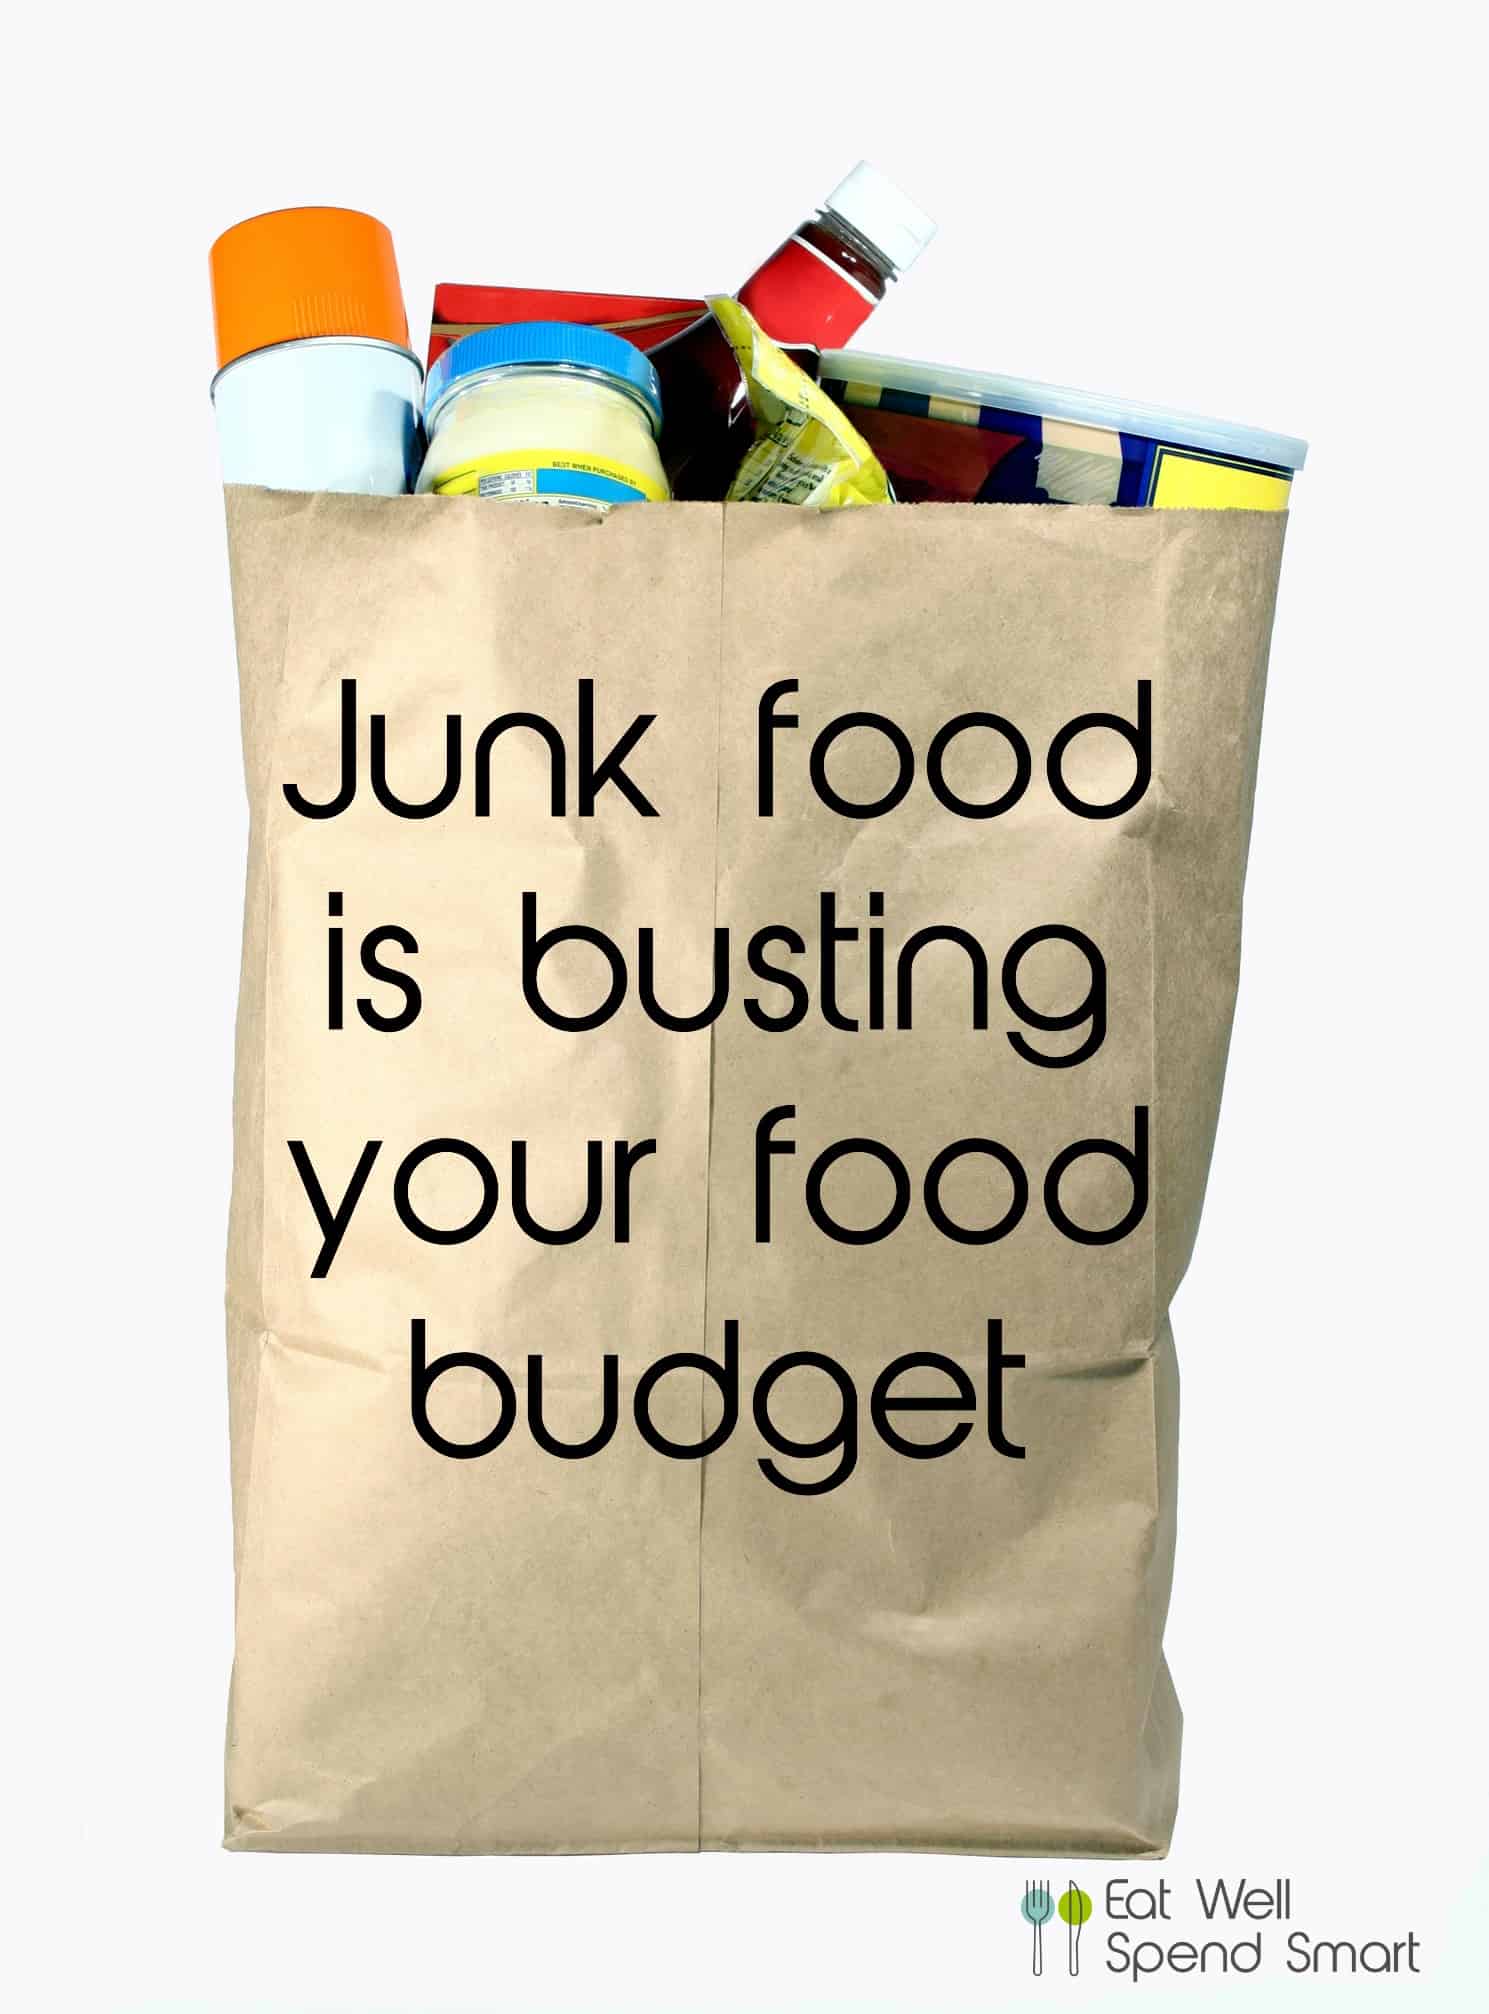 Junk food is busting your budget